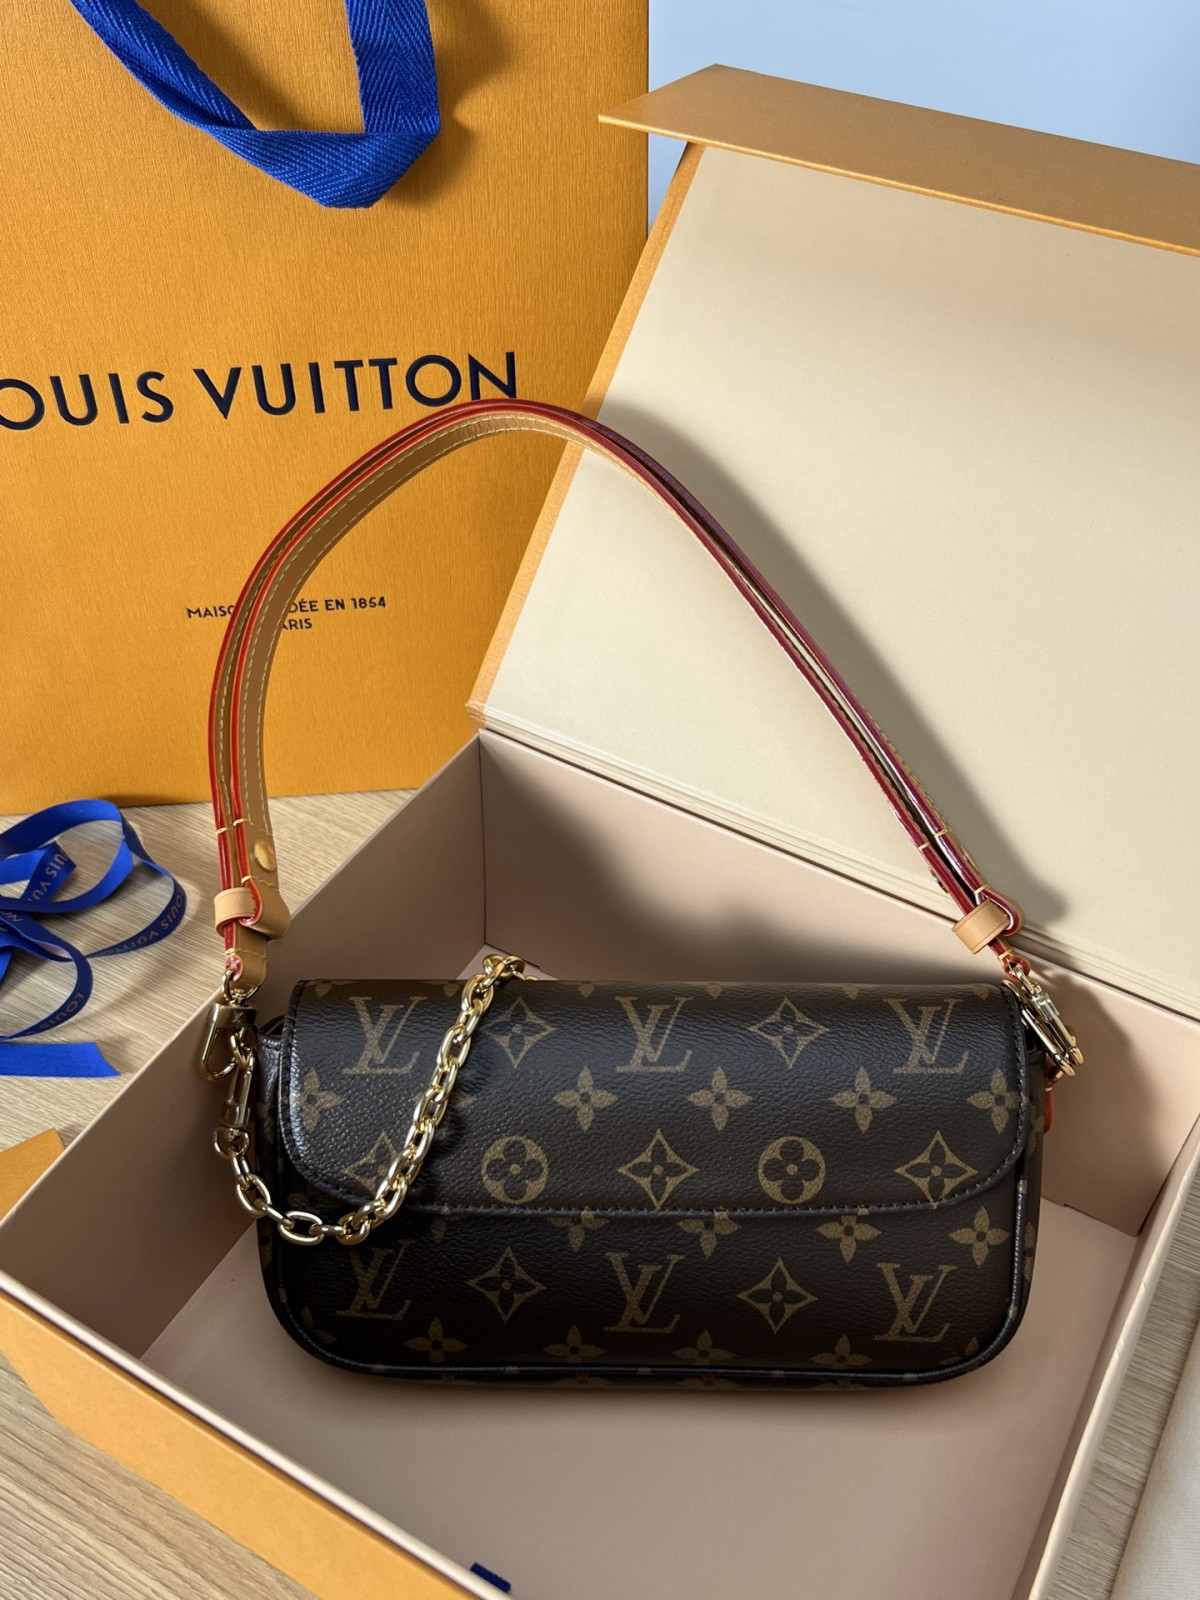 How good quality is a M81911 LOUIS VUITTON WALLET ON CHAIN IVY（2023 new edition）-بهترين معيار جي جعلي لوئس ويٽون بيگ آن لائين اسٽور، ريپليڪا ڊيزائنر بيگ ru